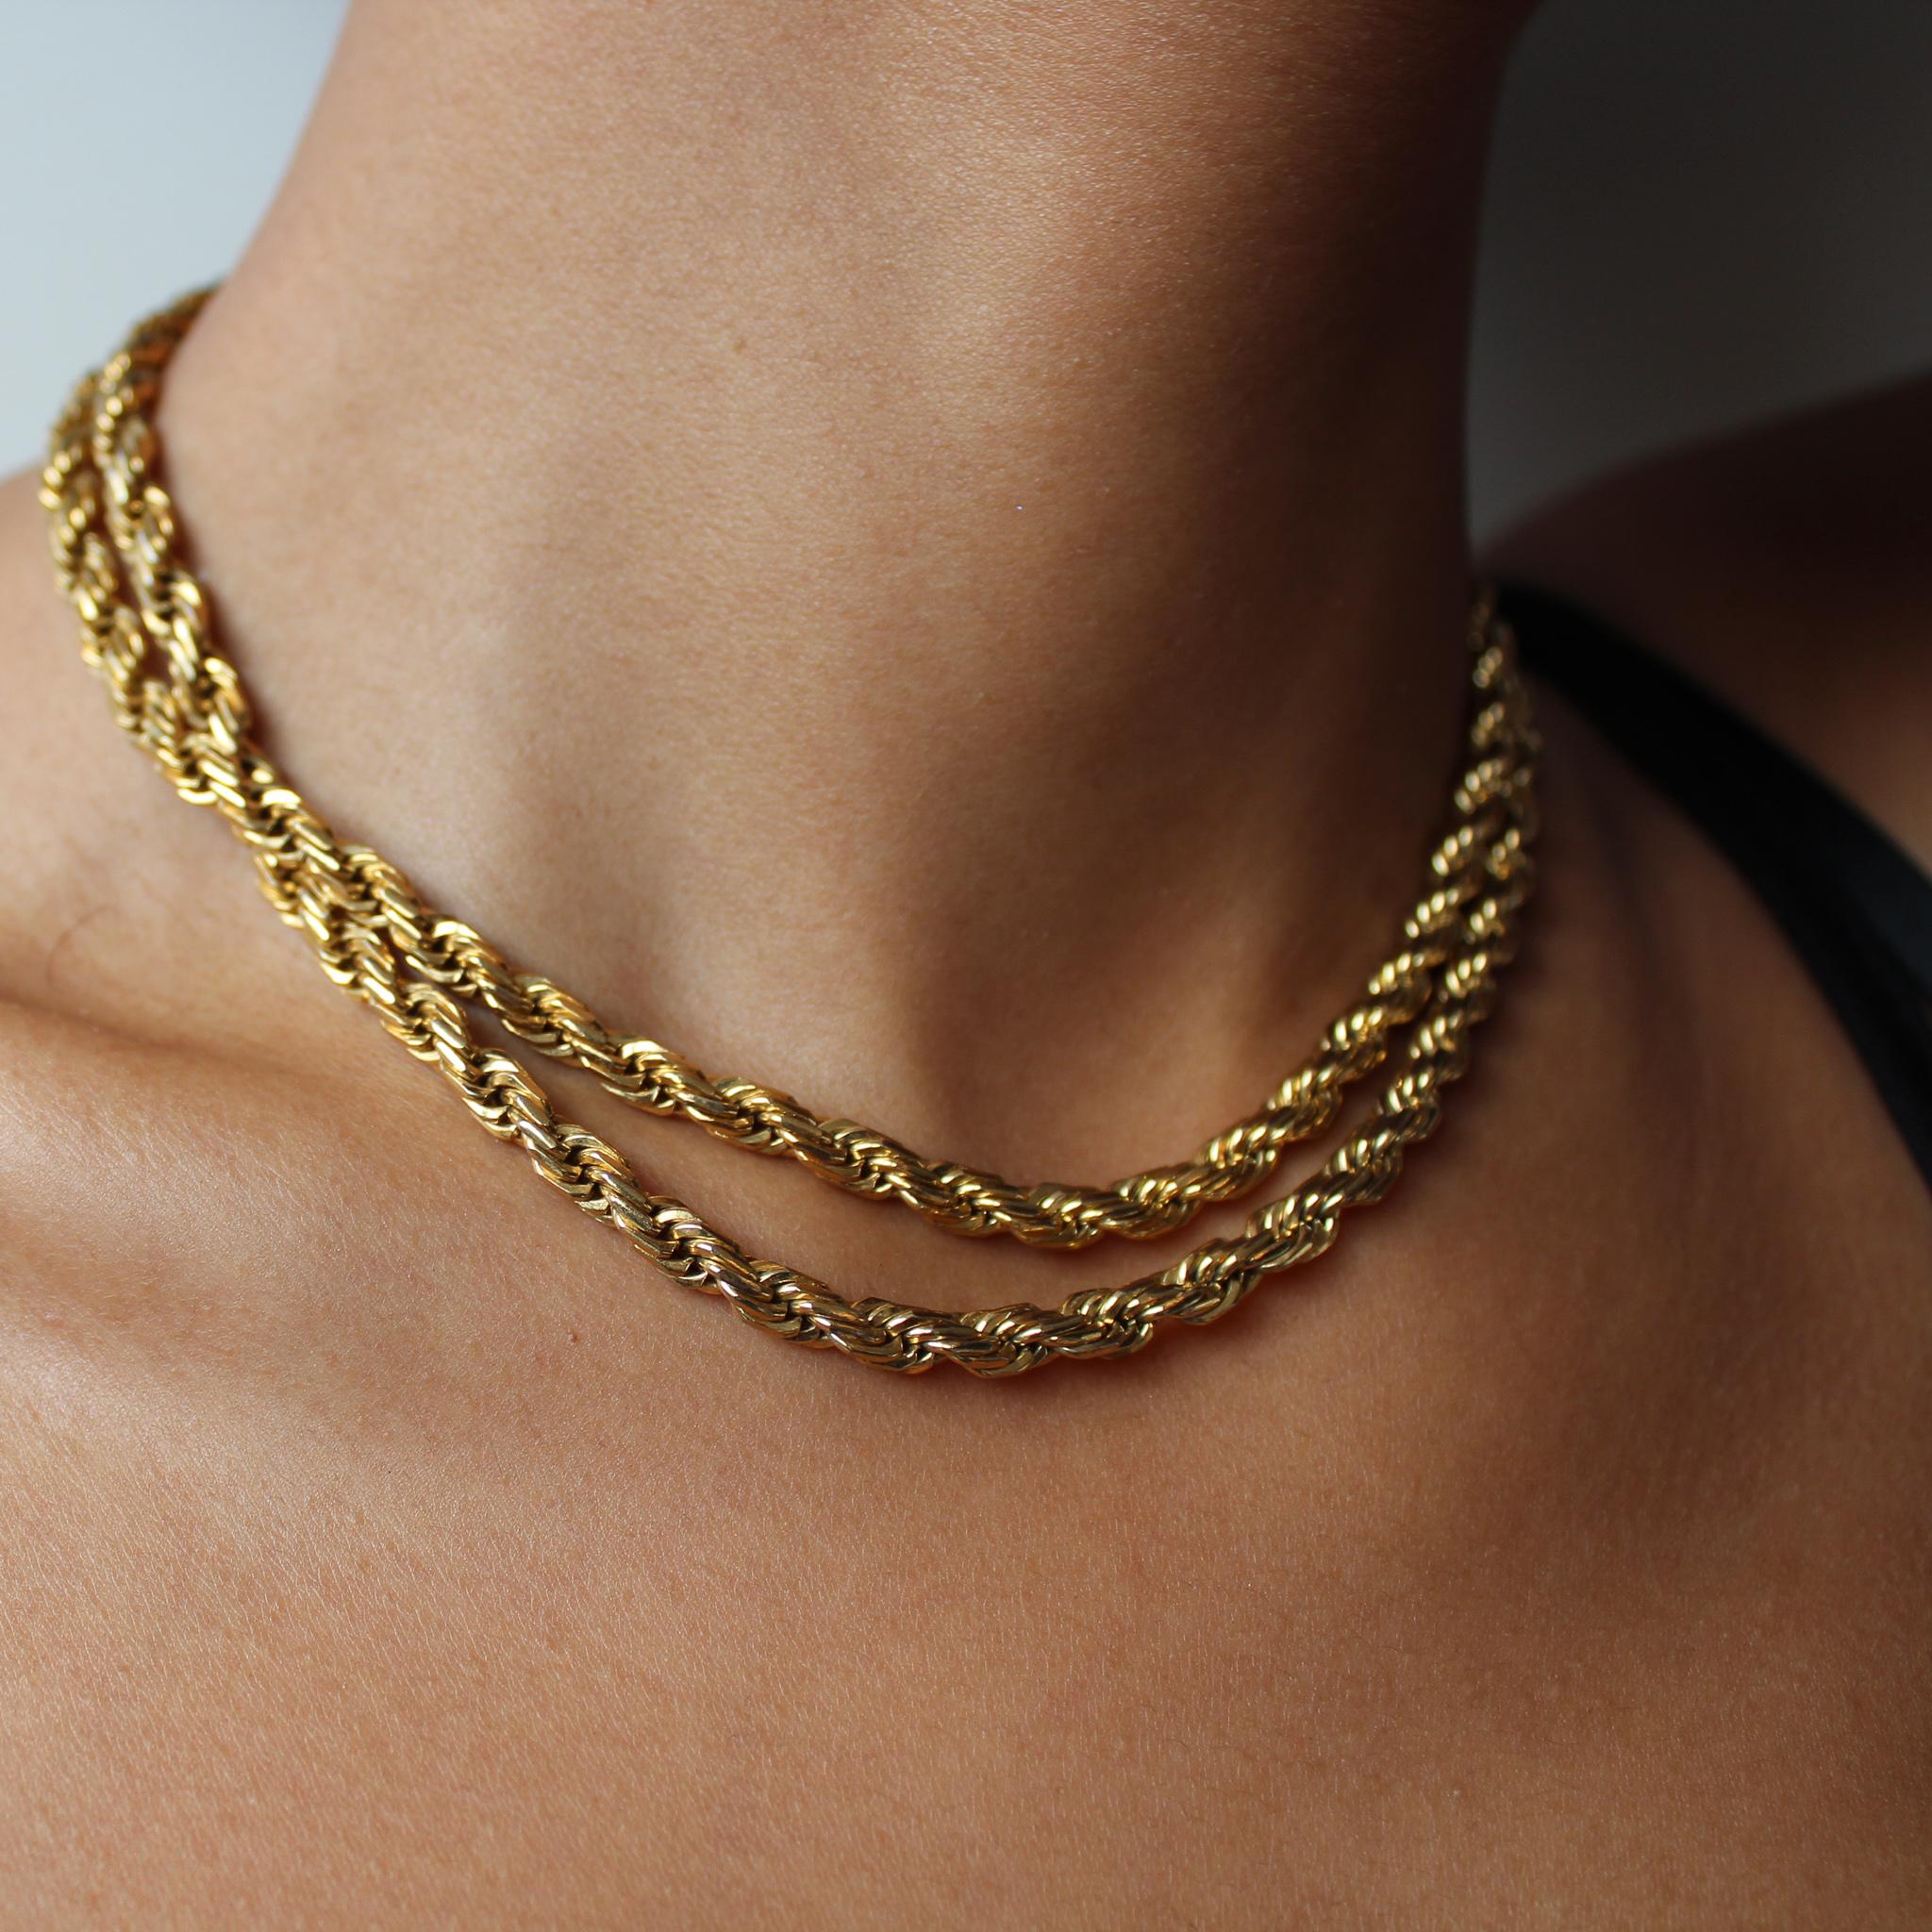 Givenchy Vintage 1970s Necklace

Super cool and versatile rope chain necklace from the legendary house of Hubert du Givenchy. Made in the 1970s, this beautiful chain is cast from gold plated metal. Can be worn solo or doubled up for